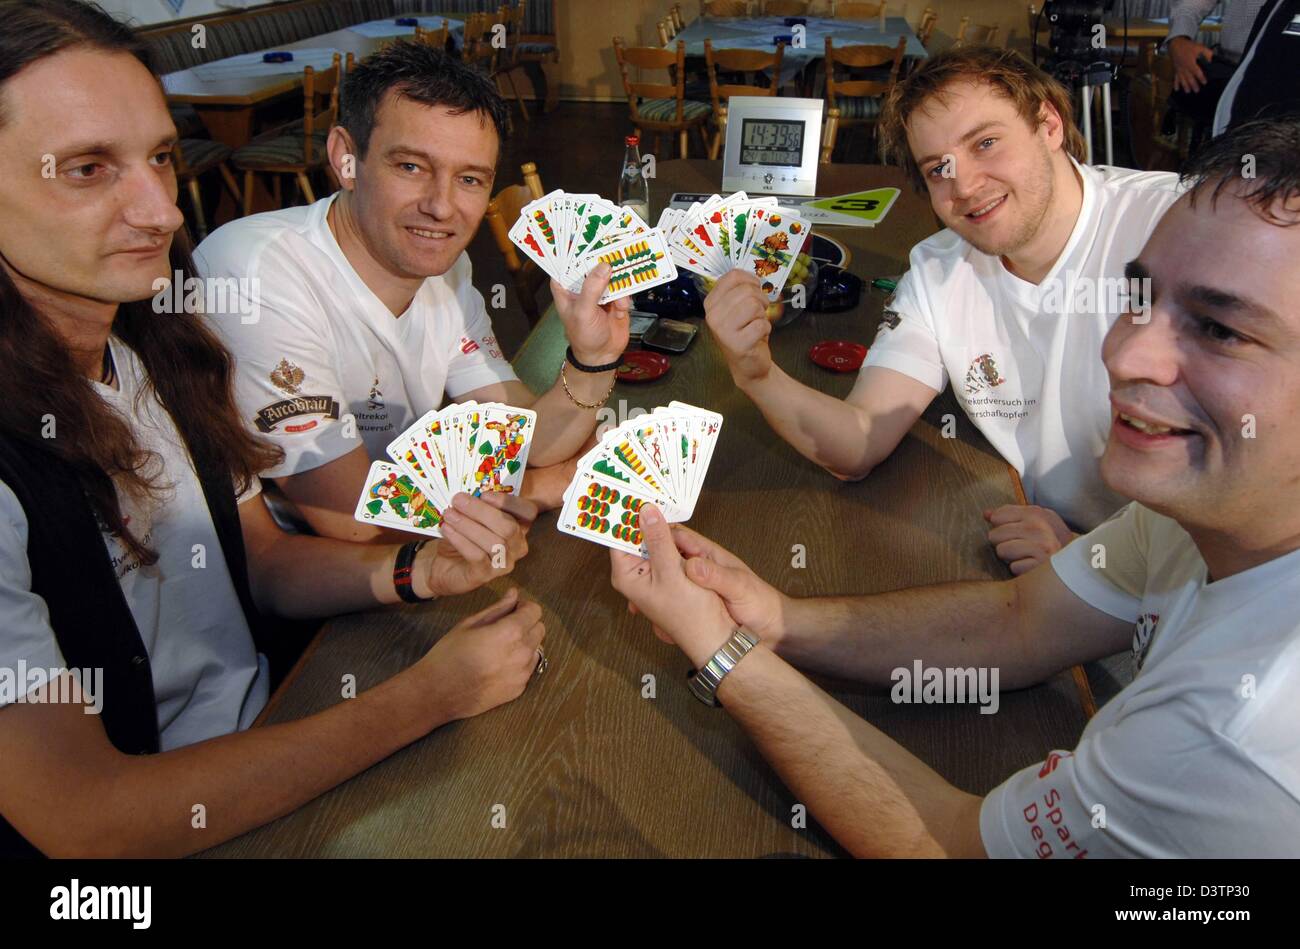 Bernhard Rasch (L-R), Disic Zeljko, Marco Schnelldorfer and Ingo Goetz play the 'Schafkopf' (lit.: 'sheep's head') card game in Aholming, Bavaria, Tuesday, 24 October 2006. With 80 hours of 'Schafkopf' they want to break the world record in non-stop card playing. Photo: Armin Weigel Stock Photo